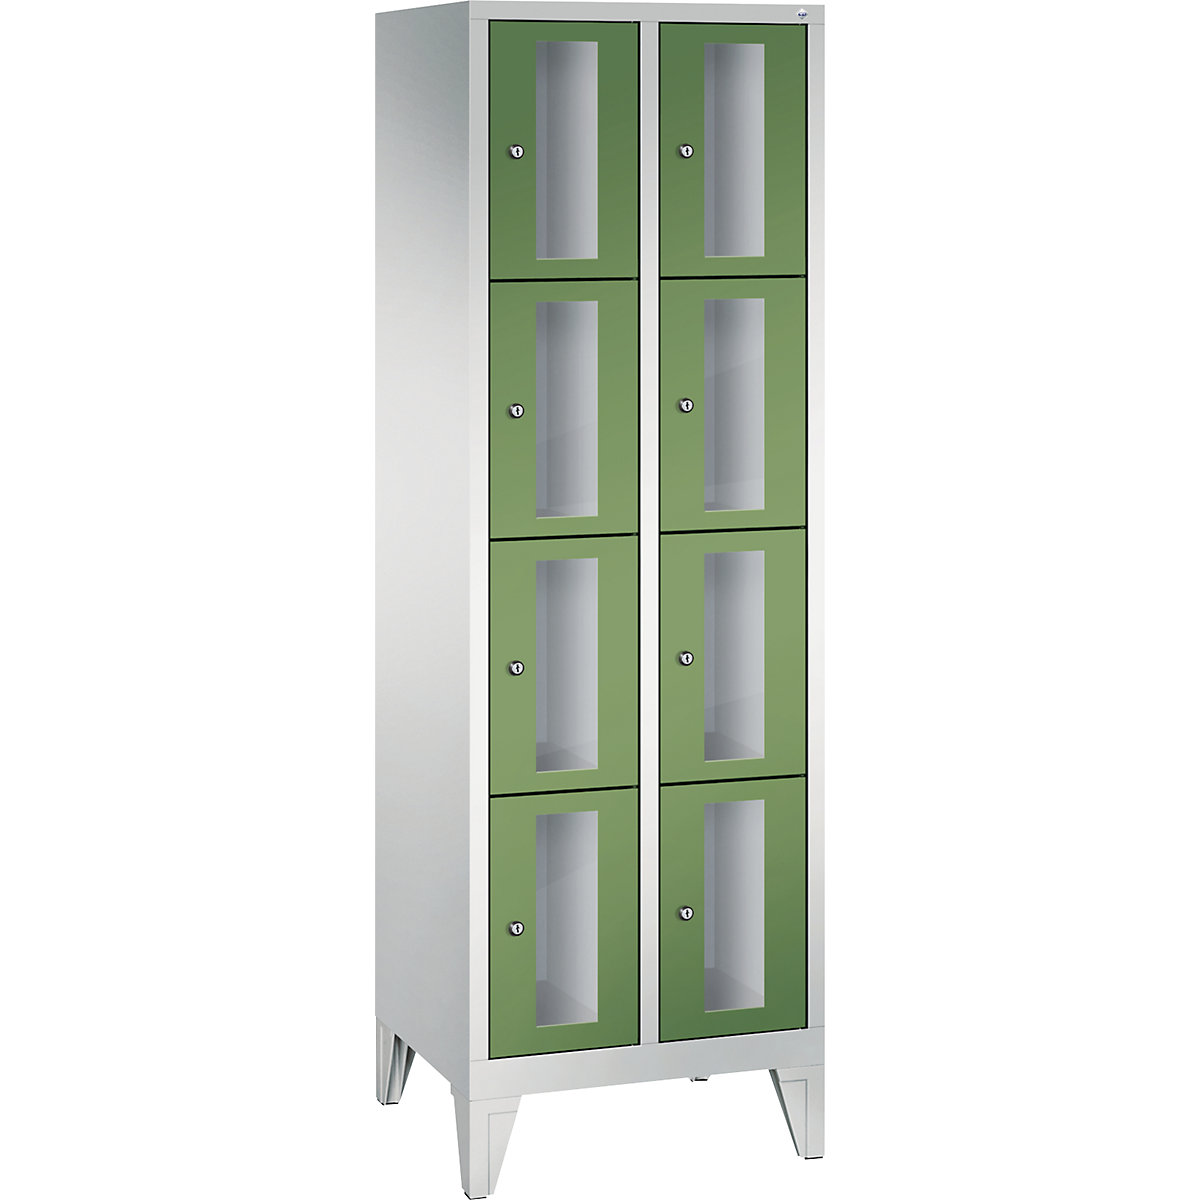 C+P – CLASSIC locker unit, compartment height 375 mm, with feet, 8 compartments, width 610 mm, reseda green door